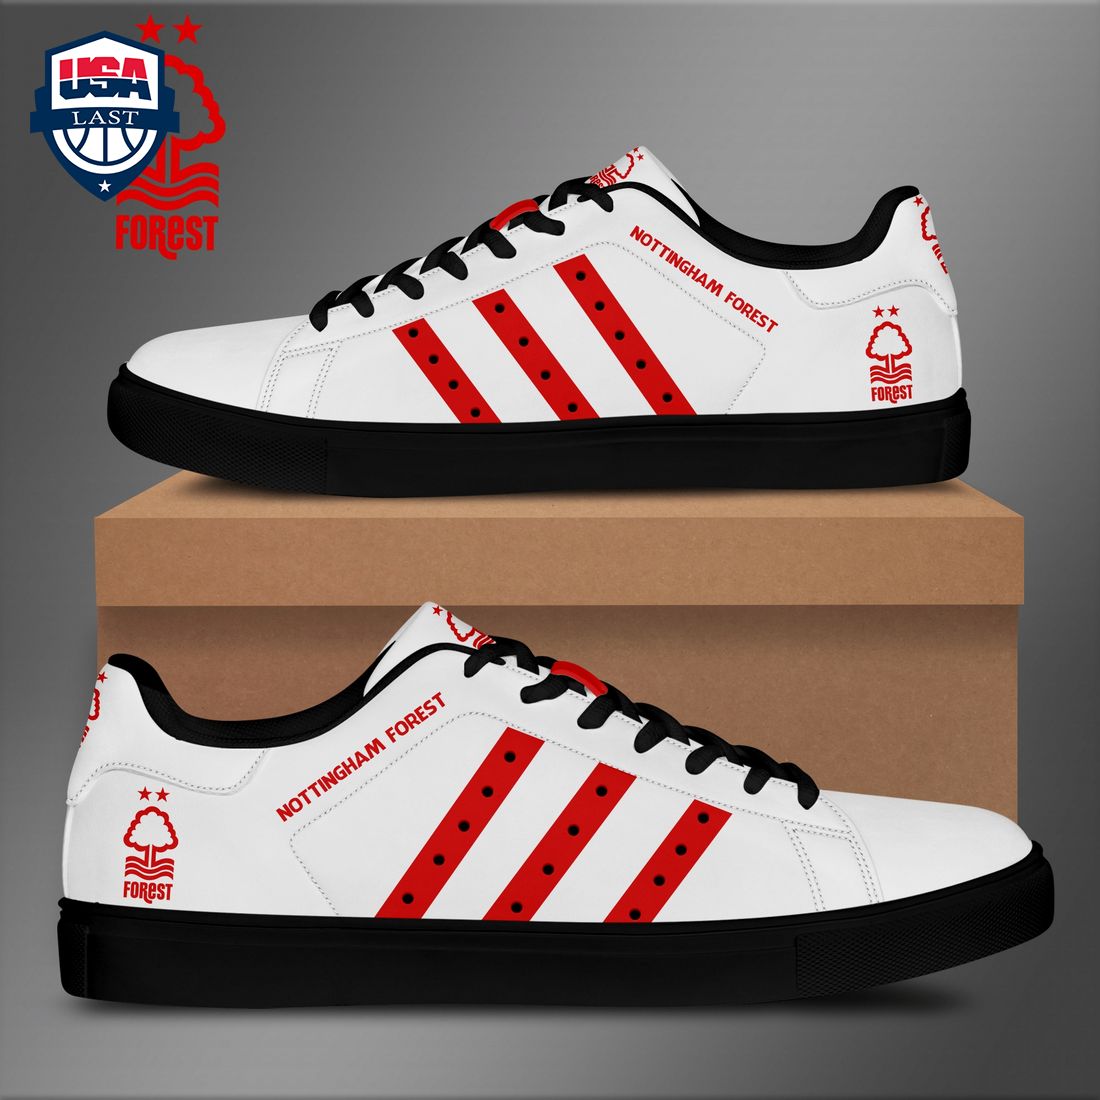 nottingham-forest-fc-red-stripes-style-2-stan-smith-low-top-shoes-1-tegaV.jpg